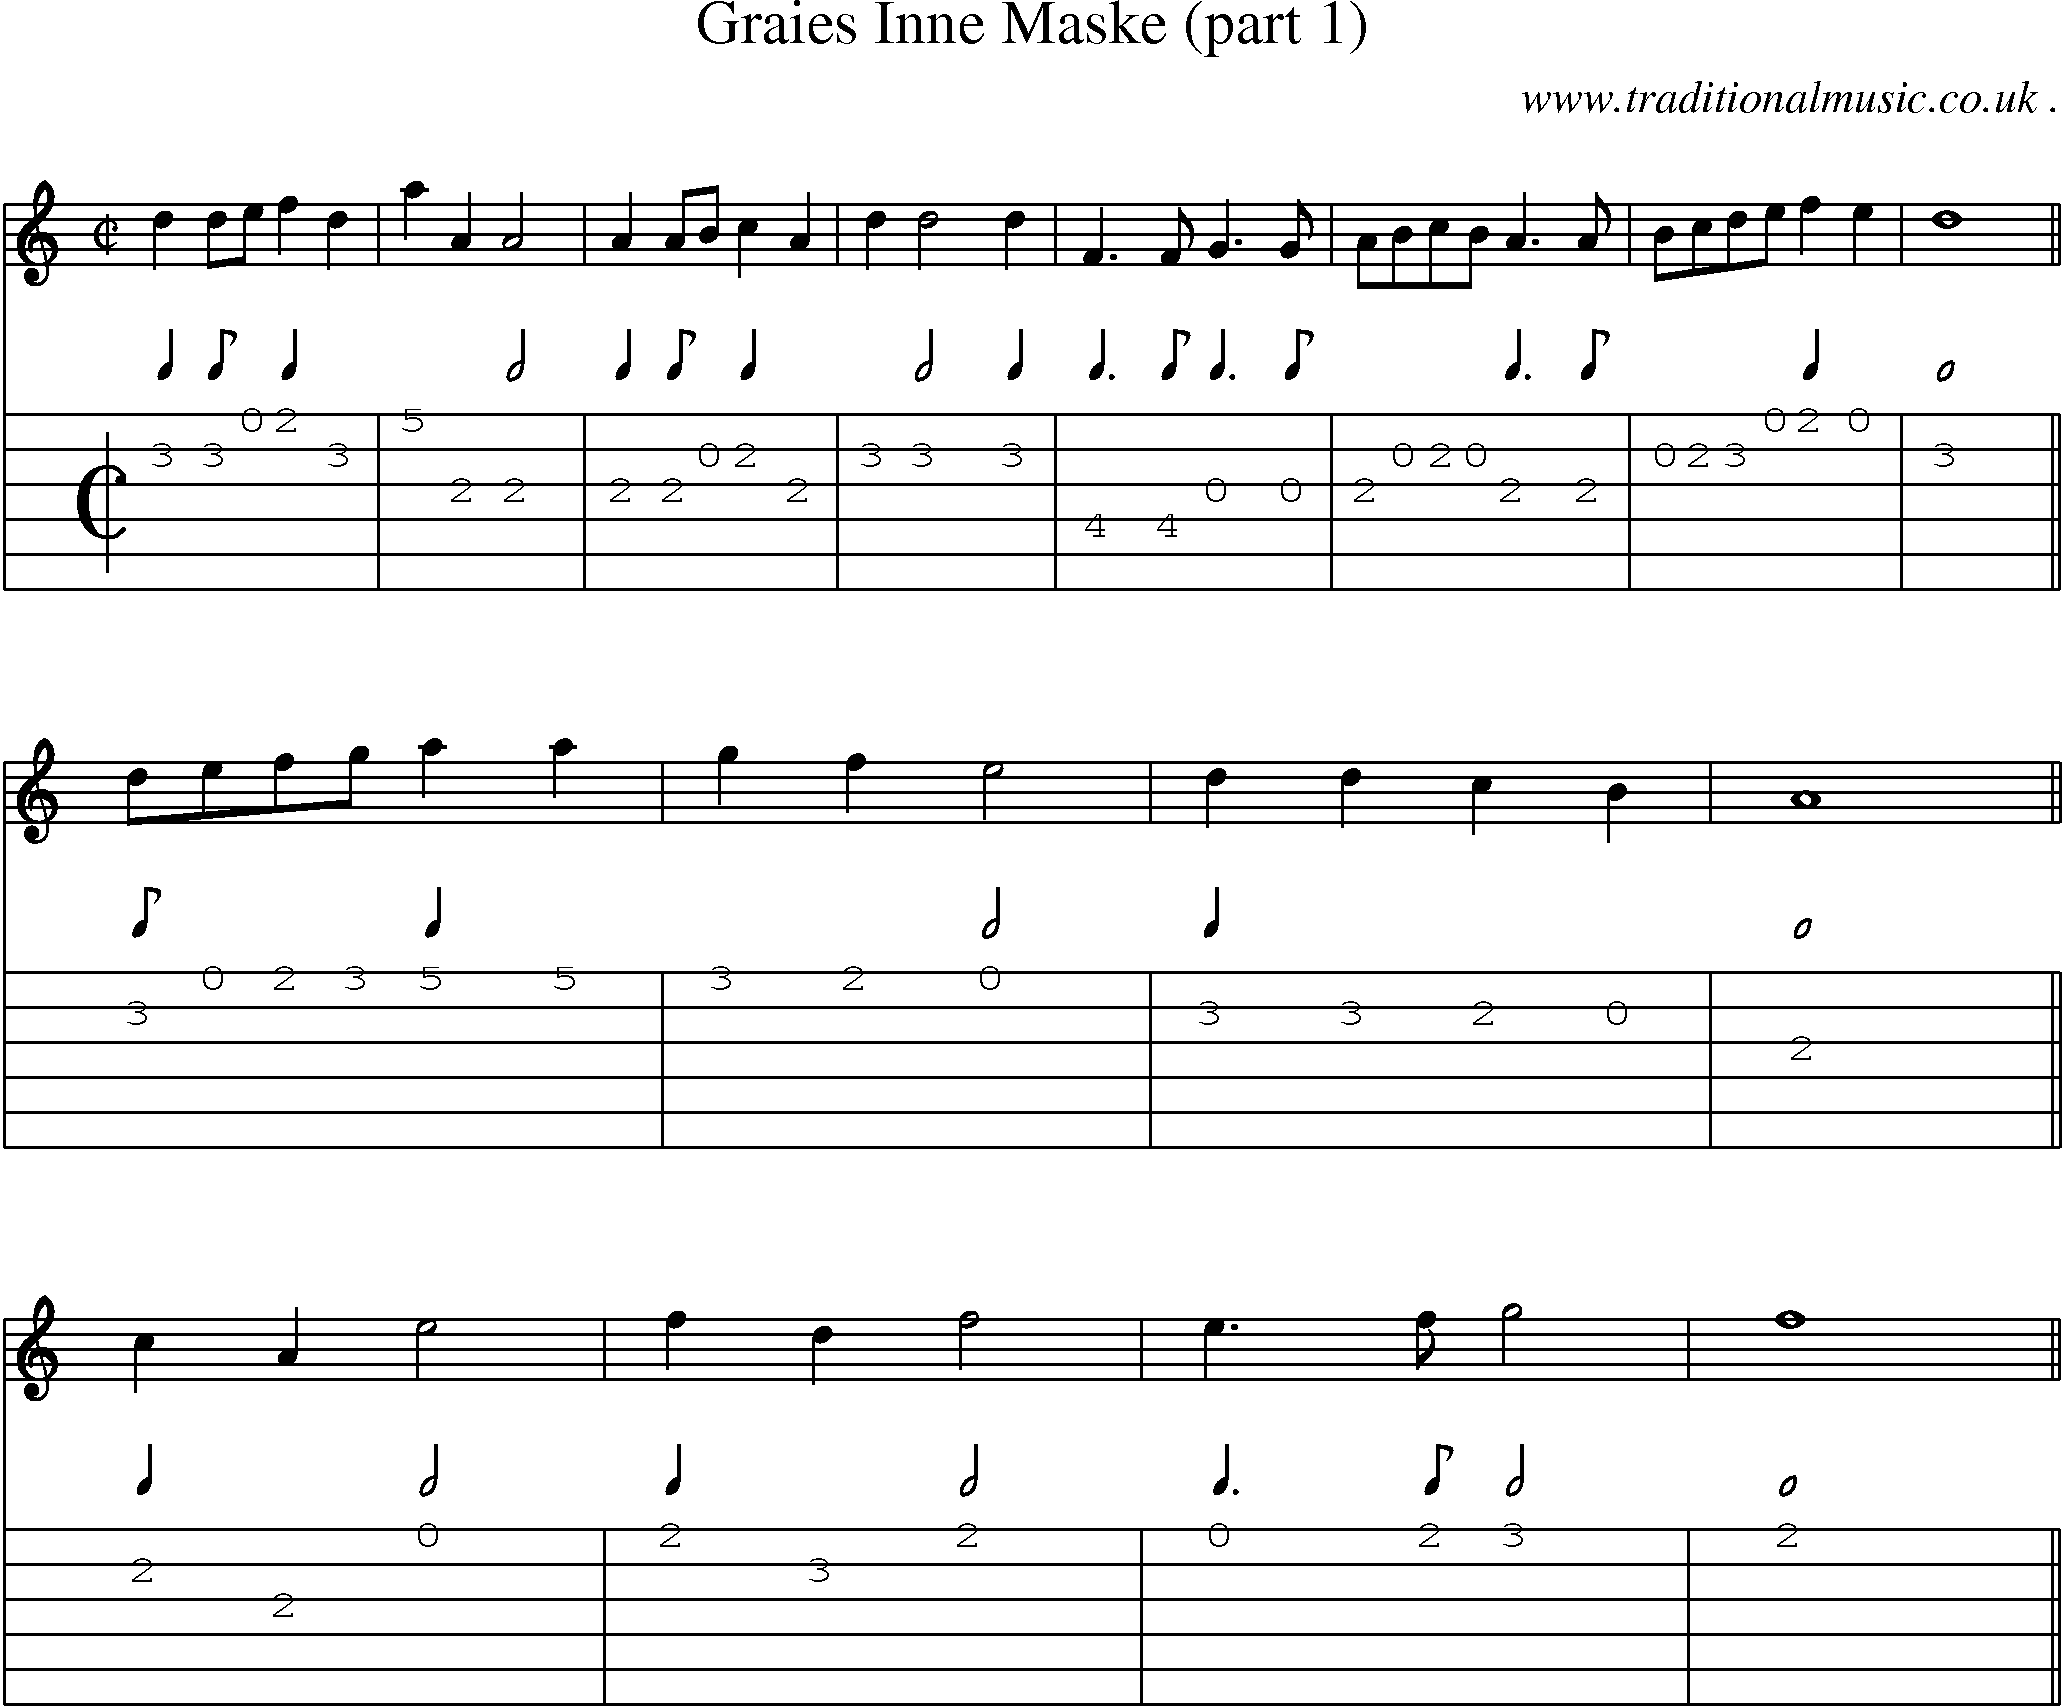 Sheet-Music and Guitar Tabs for Graies Inne Maske (part 1)